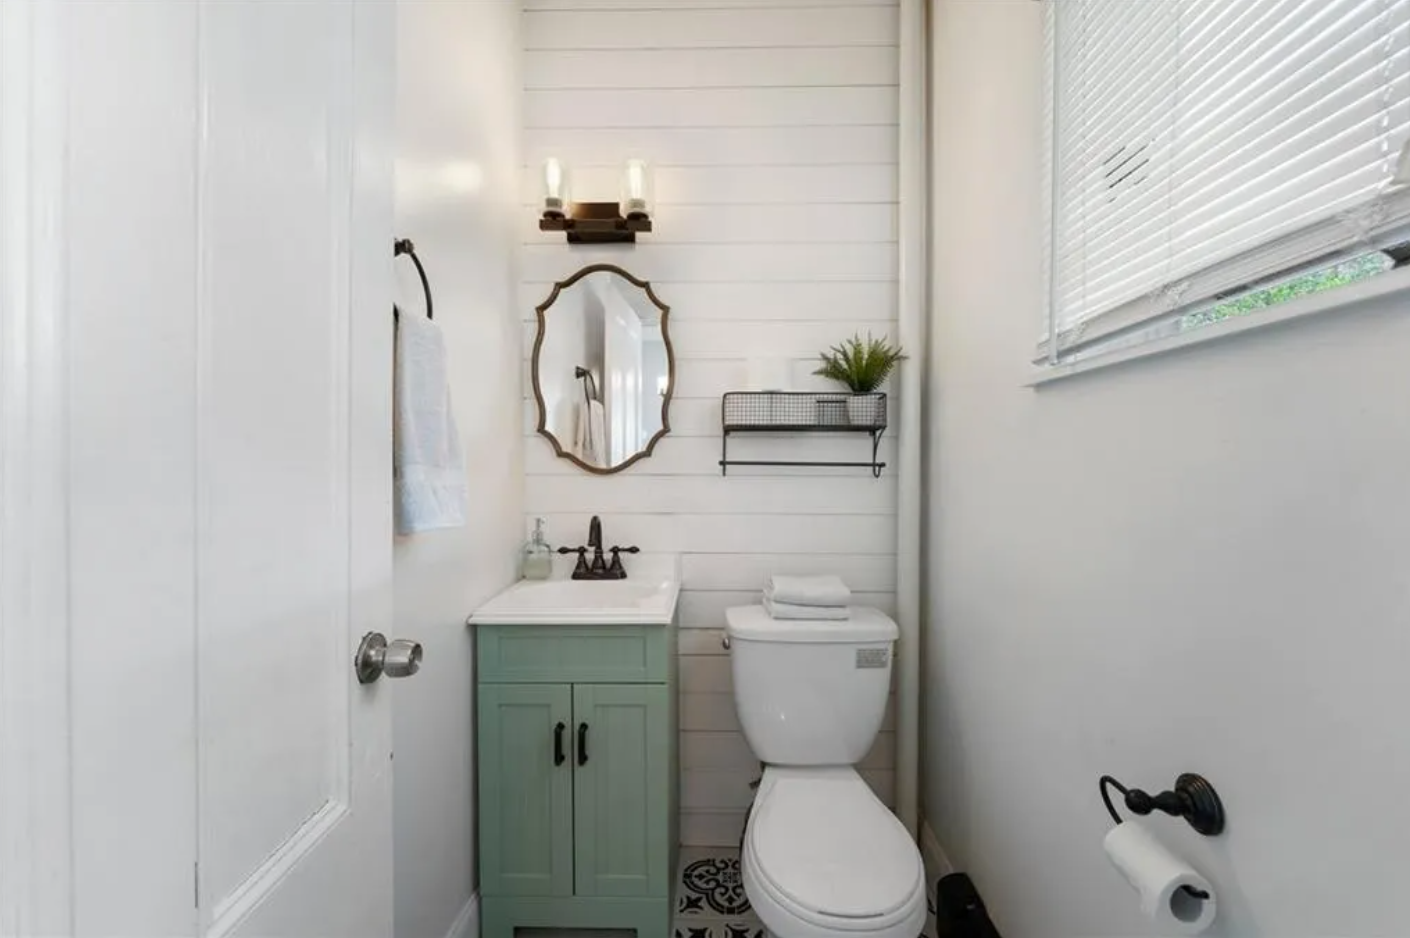 Bathroom with white walls and single vanity with sage green cabinetry.